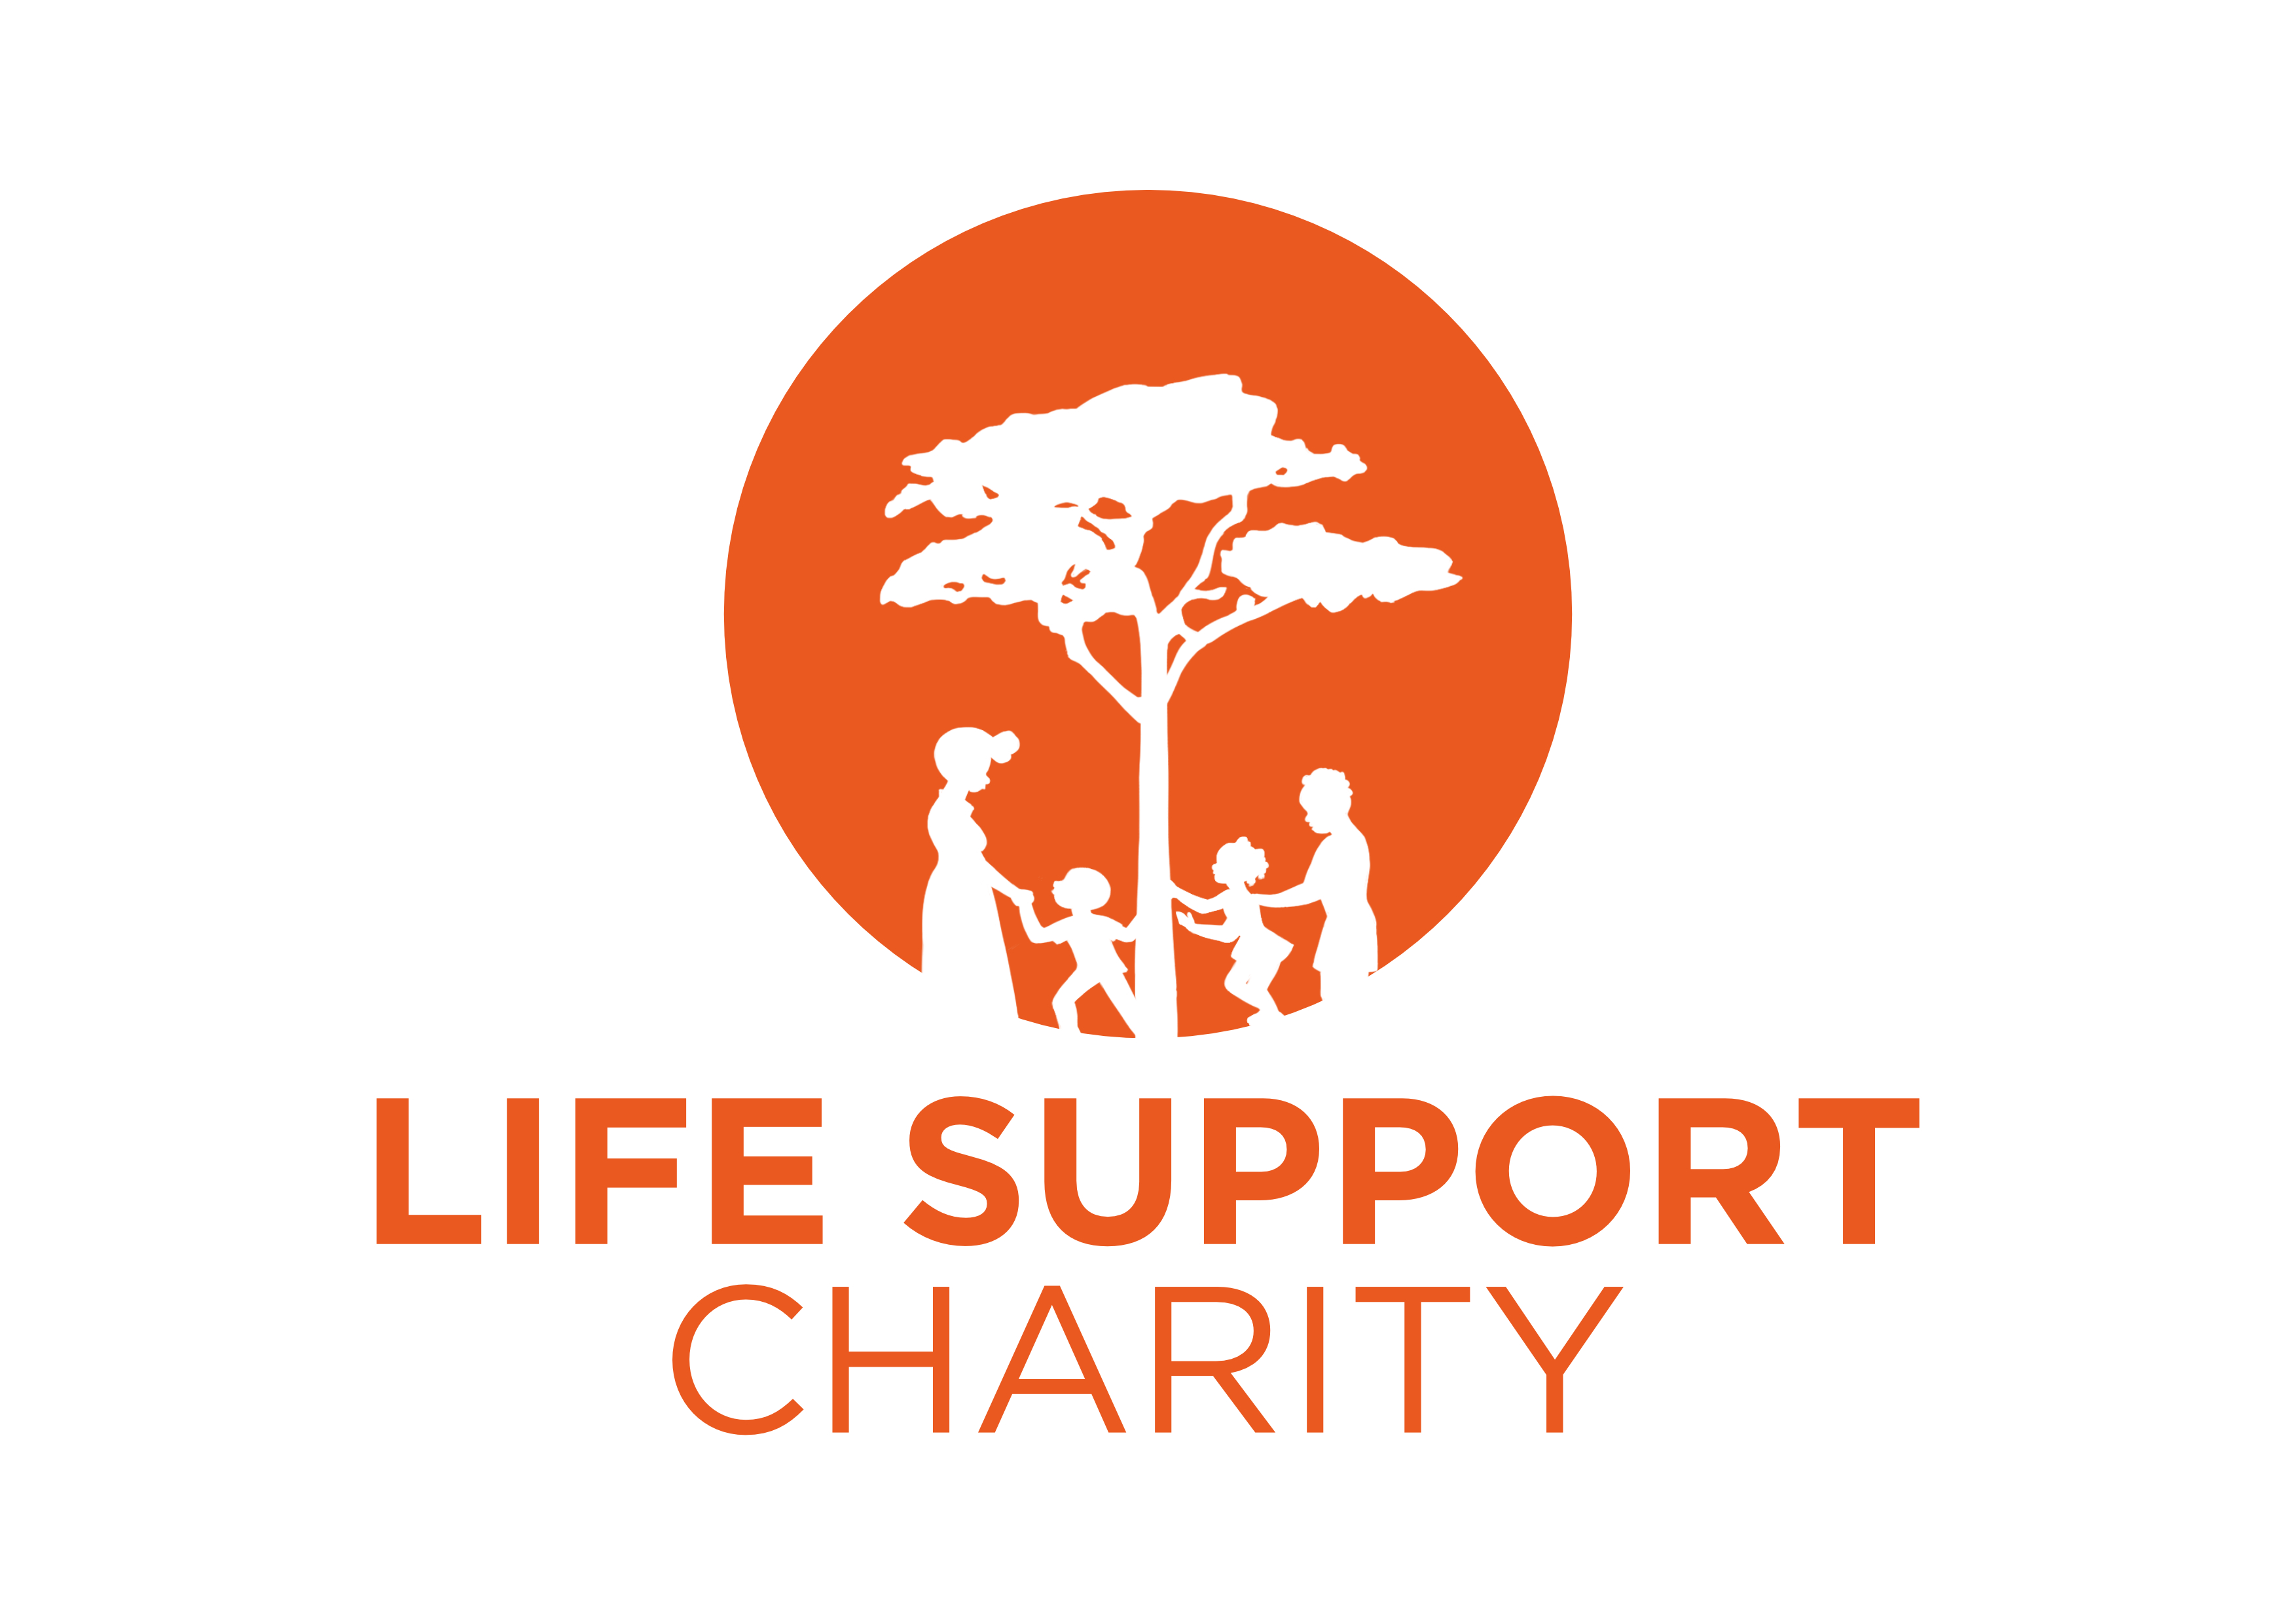 Life Support Charity logo